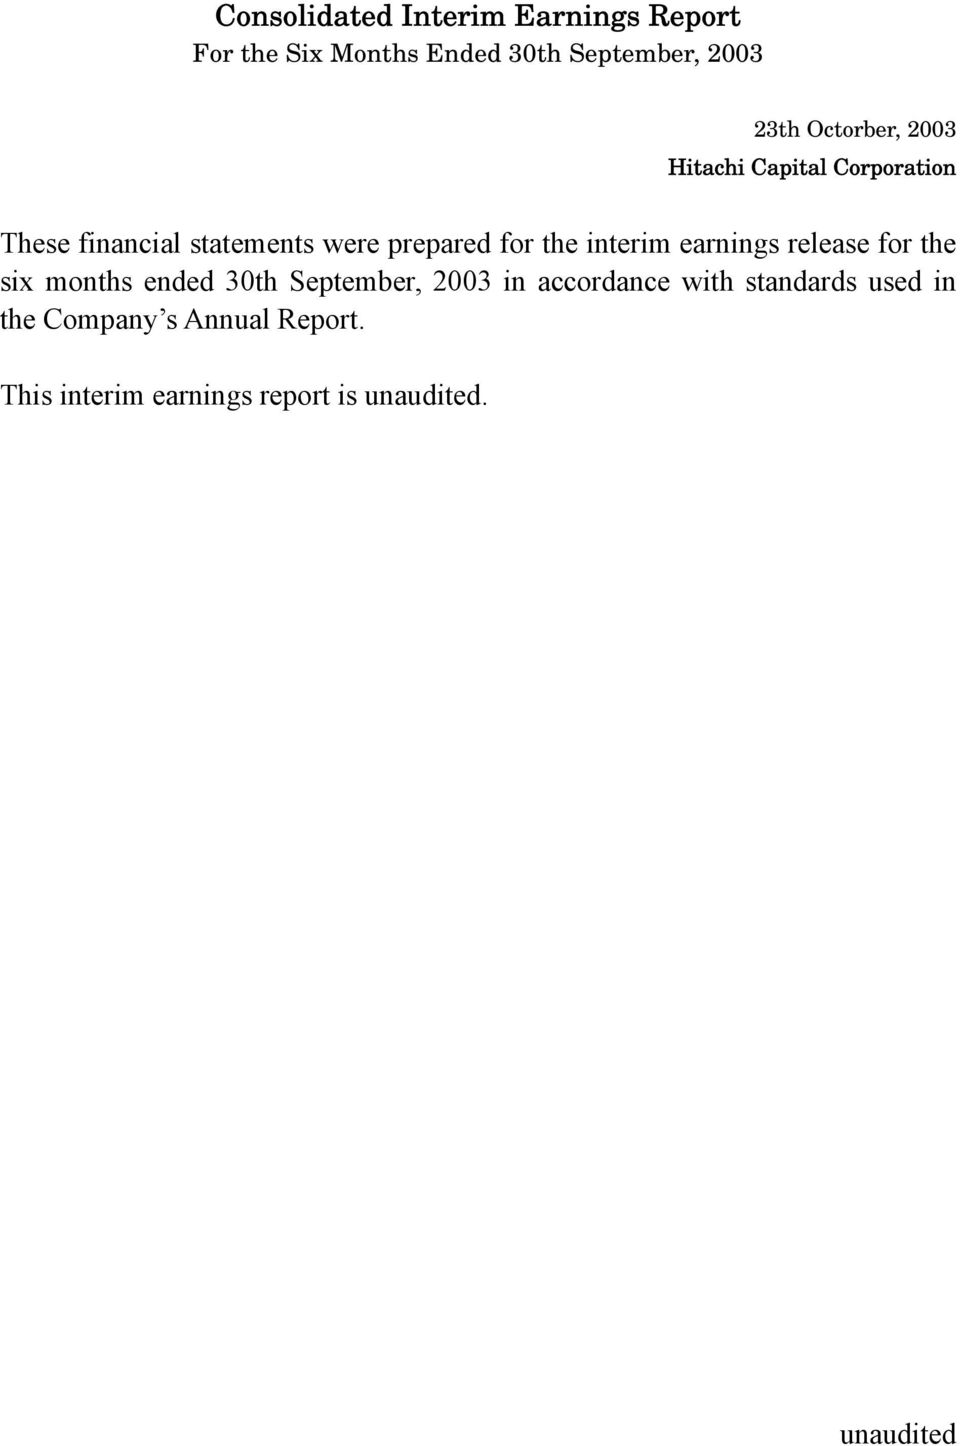 the interim earnings release for the six months ended 30th September, 2003 in